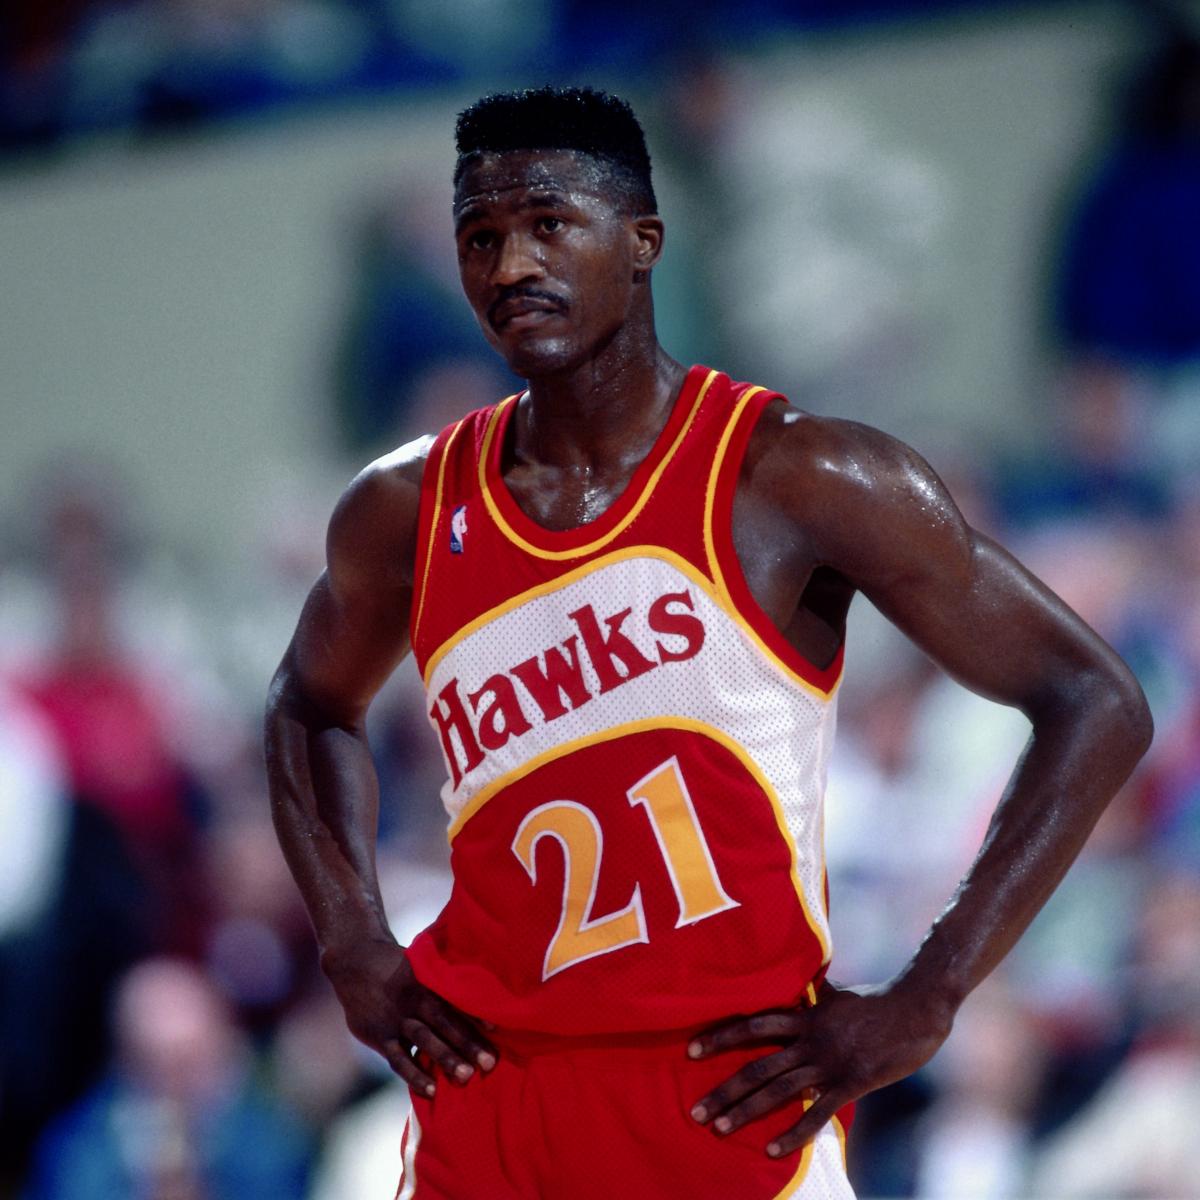 What's the most popular Hawks jersey?